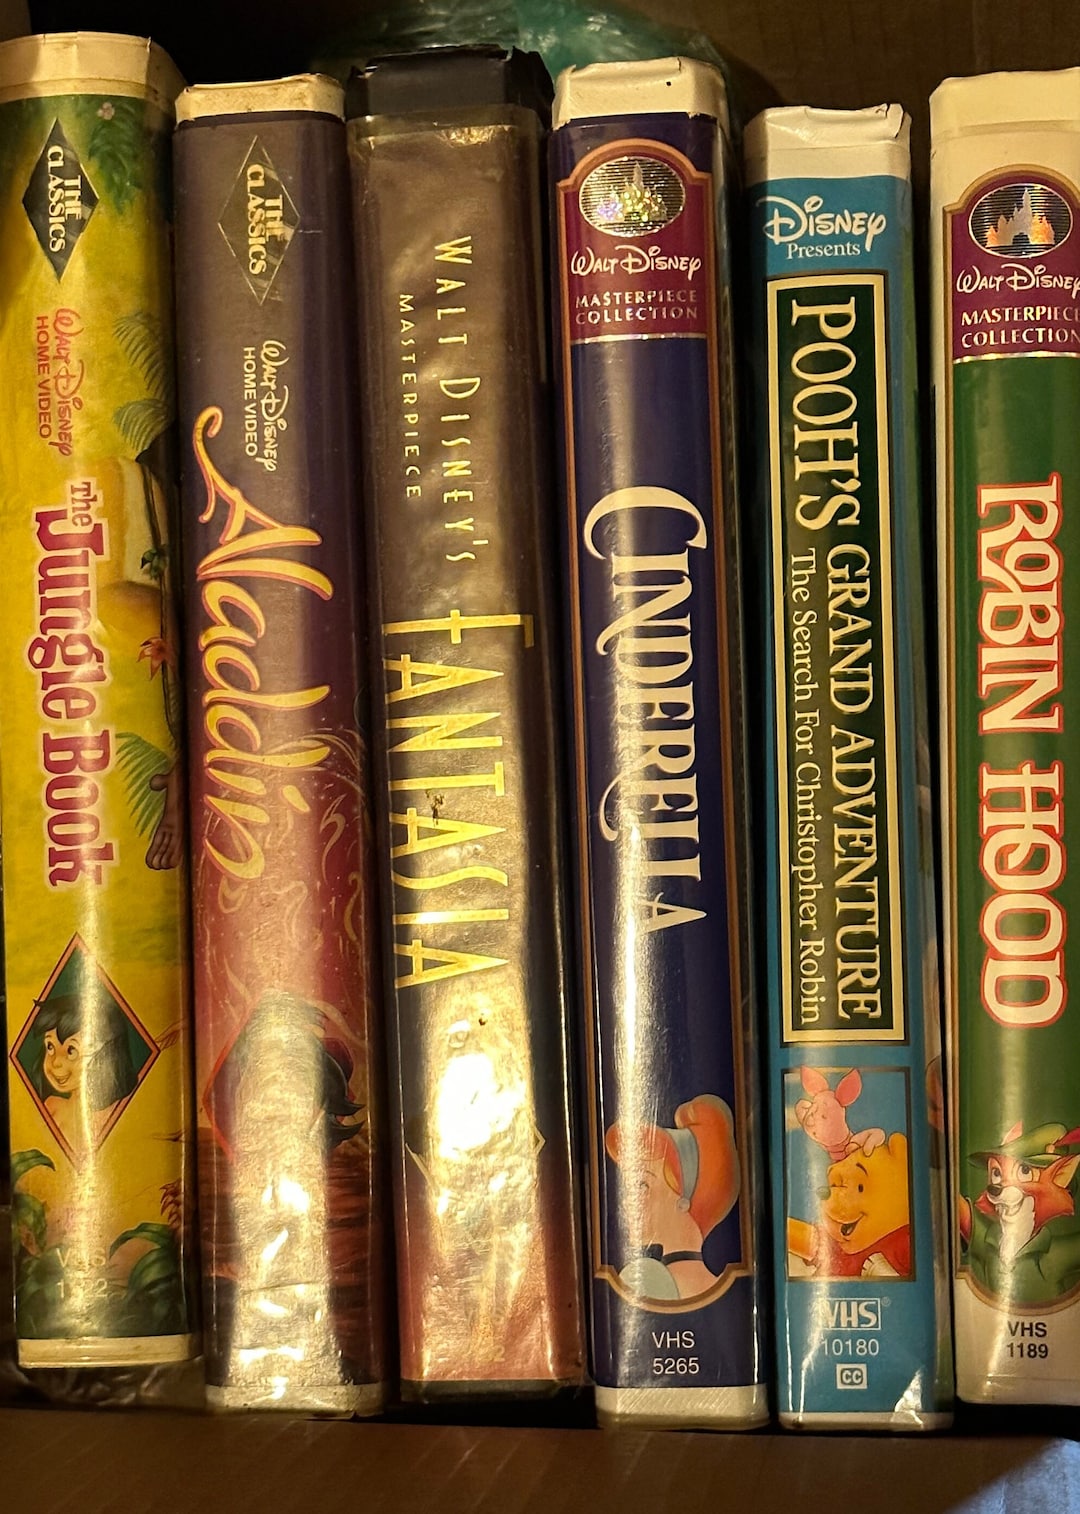 A Standard Walt Disney VHS Classic Collection You Choose - Etsy